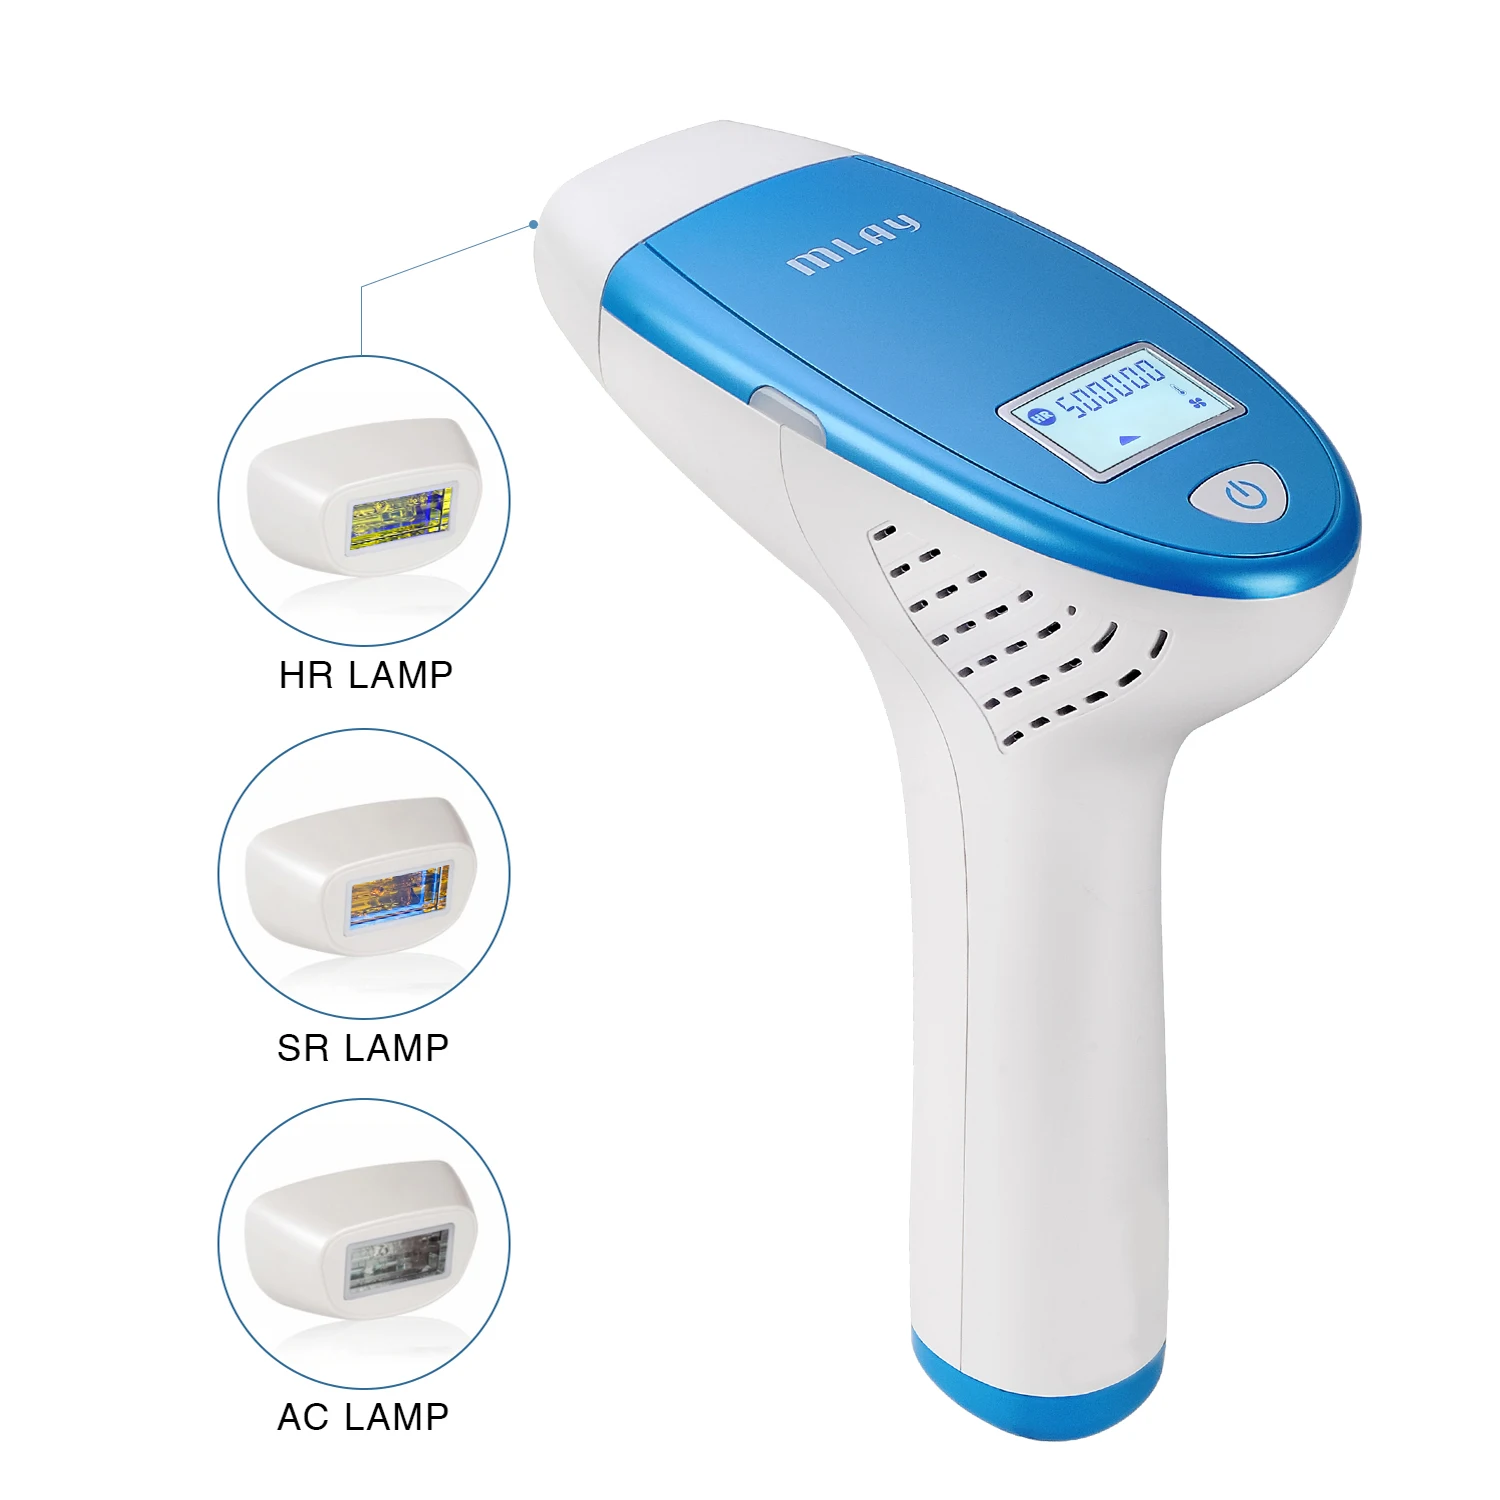 Mlay Wholesale Free Shipping M3 500000 Flashes Home Use Portable IPL Laser Hair Removal Lamp Holder